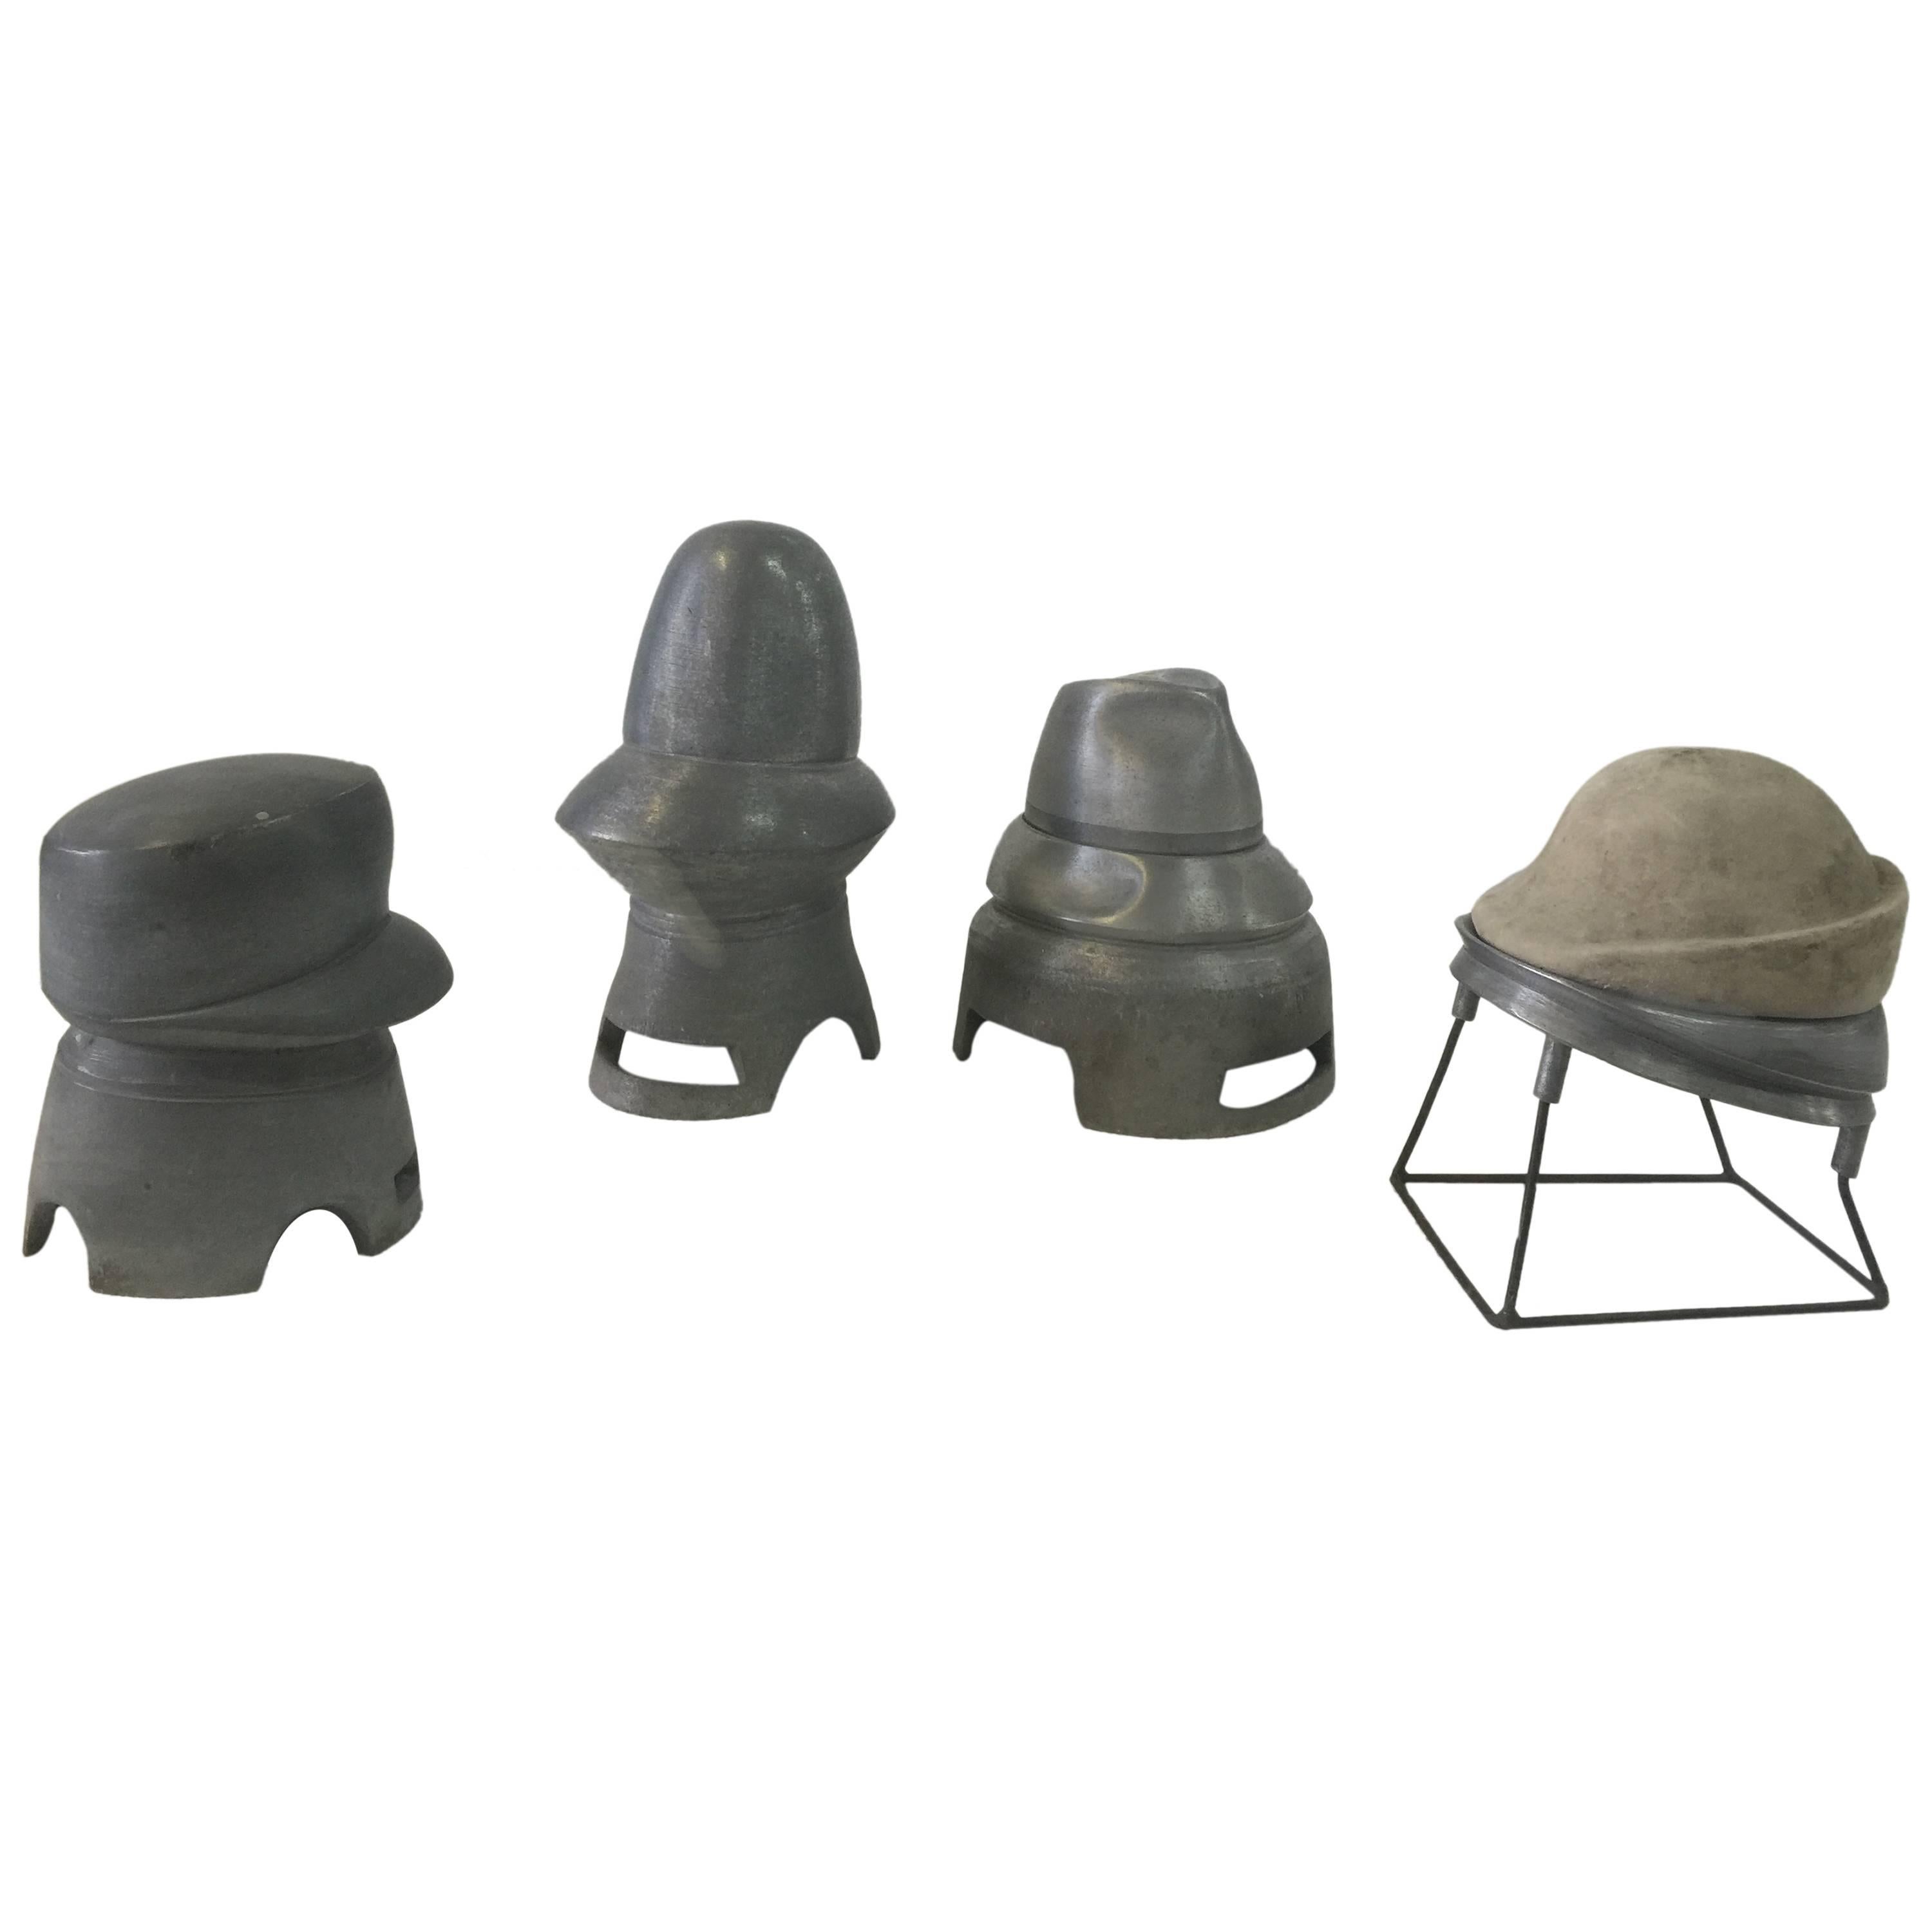 Wonderful Antique Hat Mold Collection